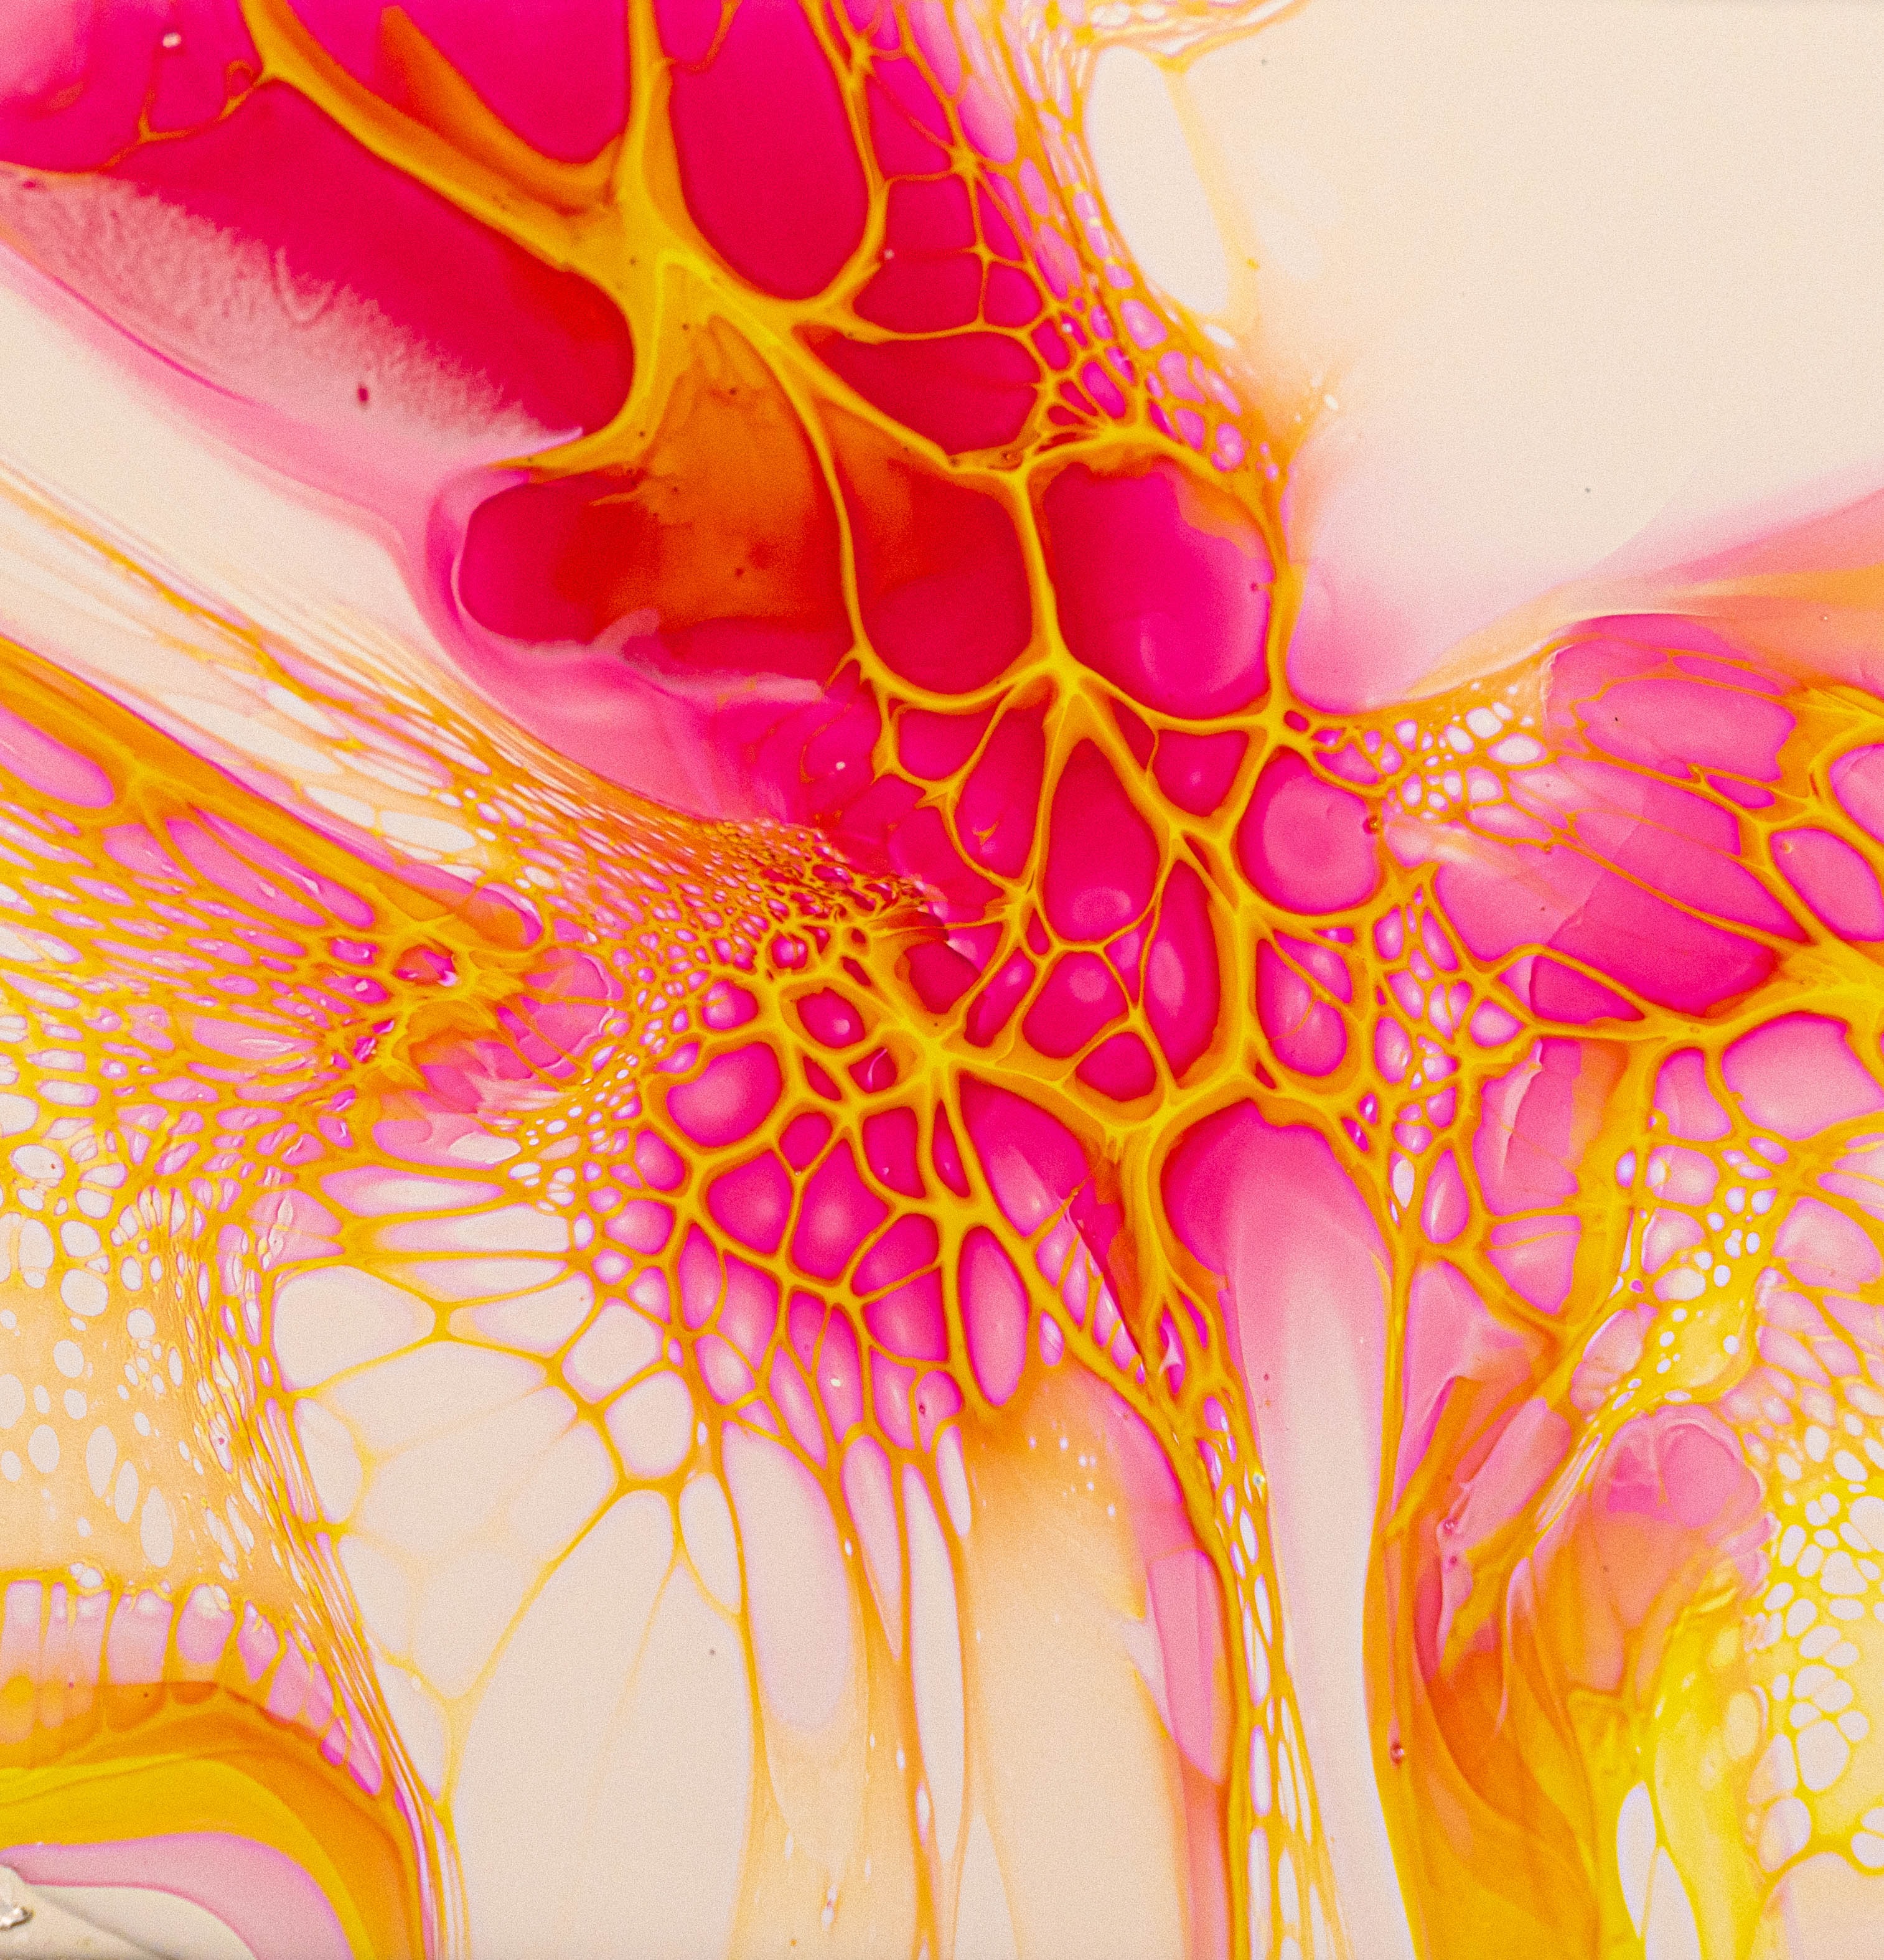 paint, abstract, pink, yellow, divorces, liquid QHD